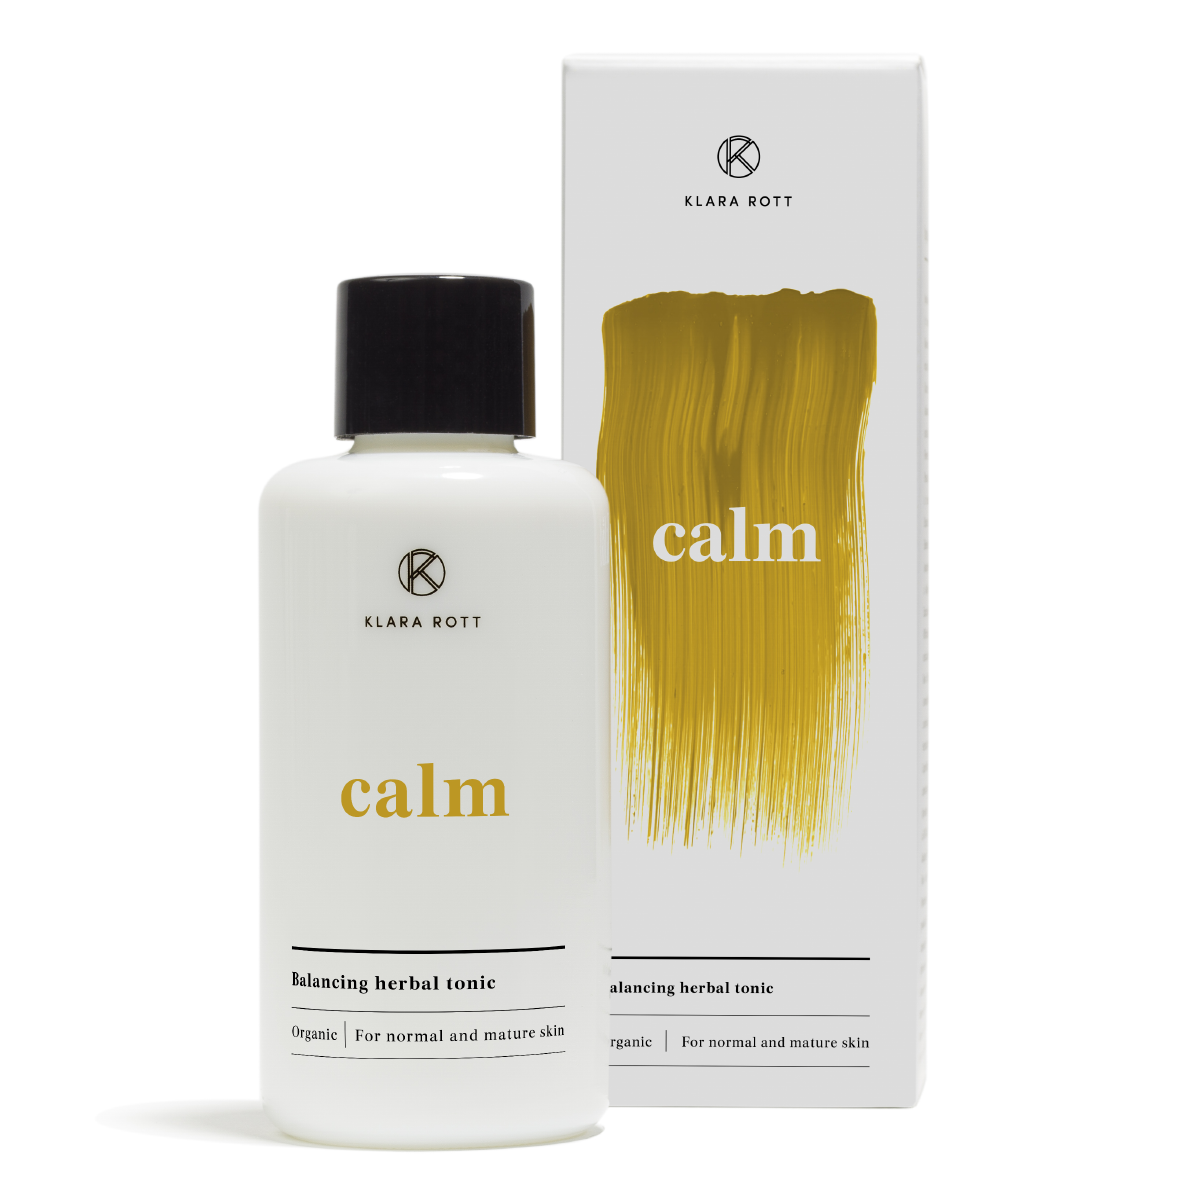 Calm - Balancing herbal tonic for normal and mature skin 